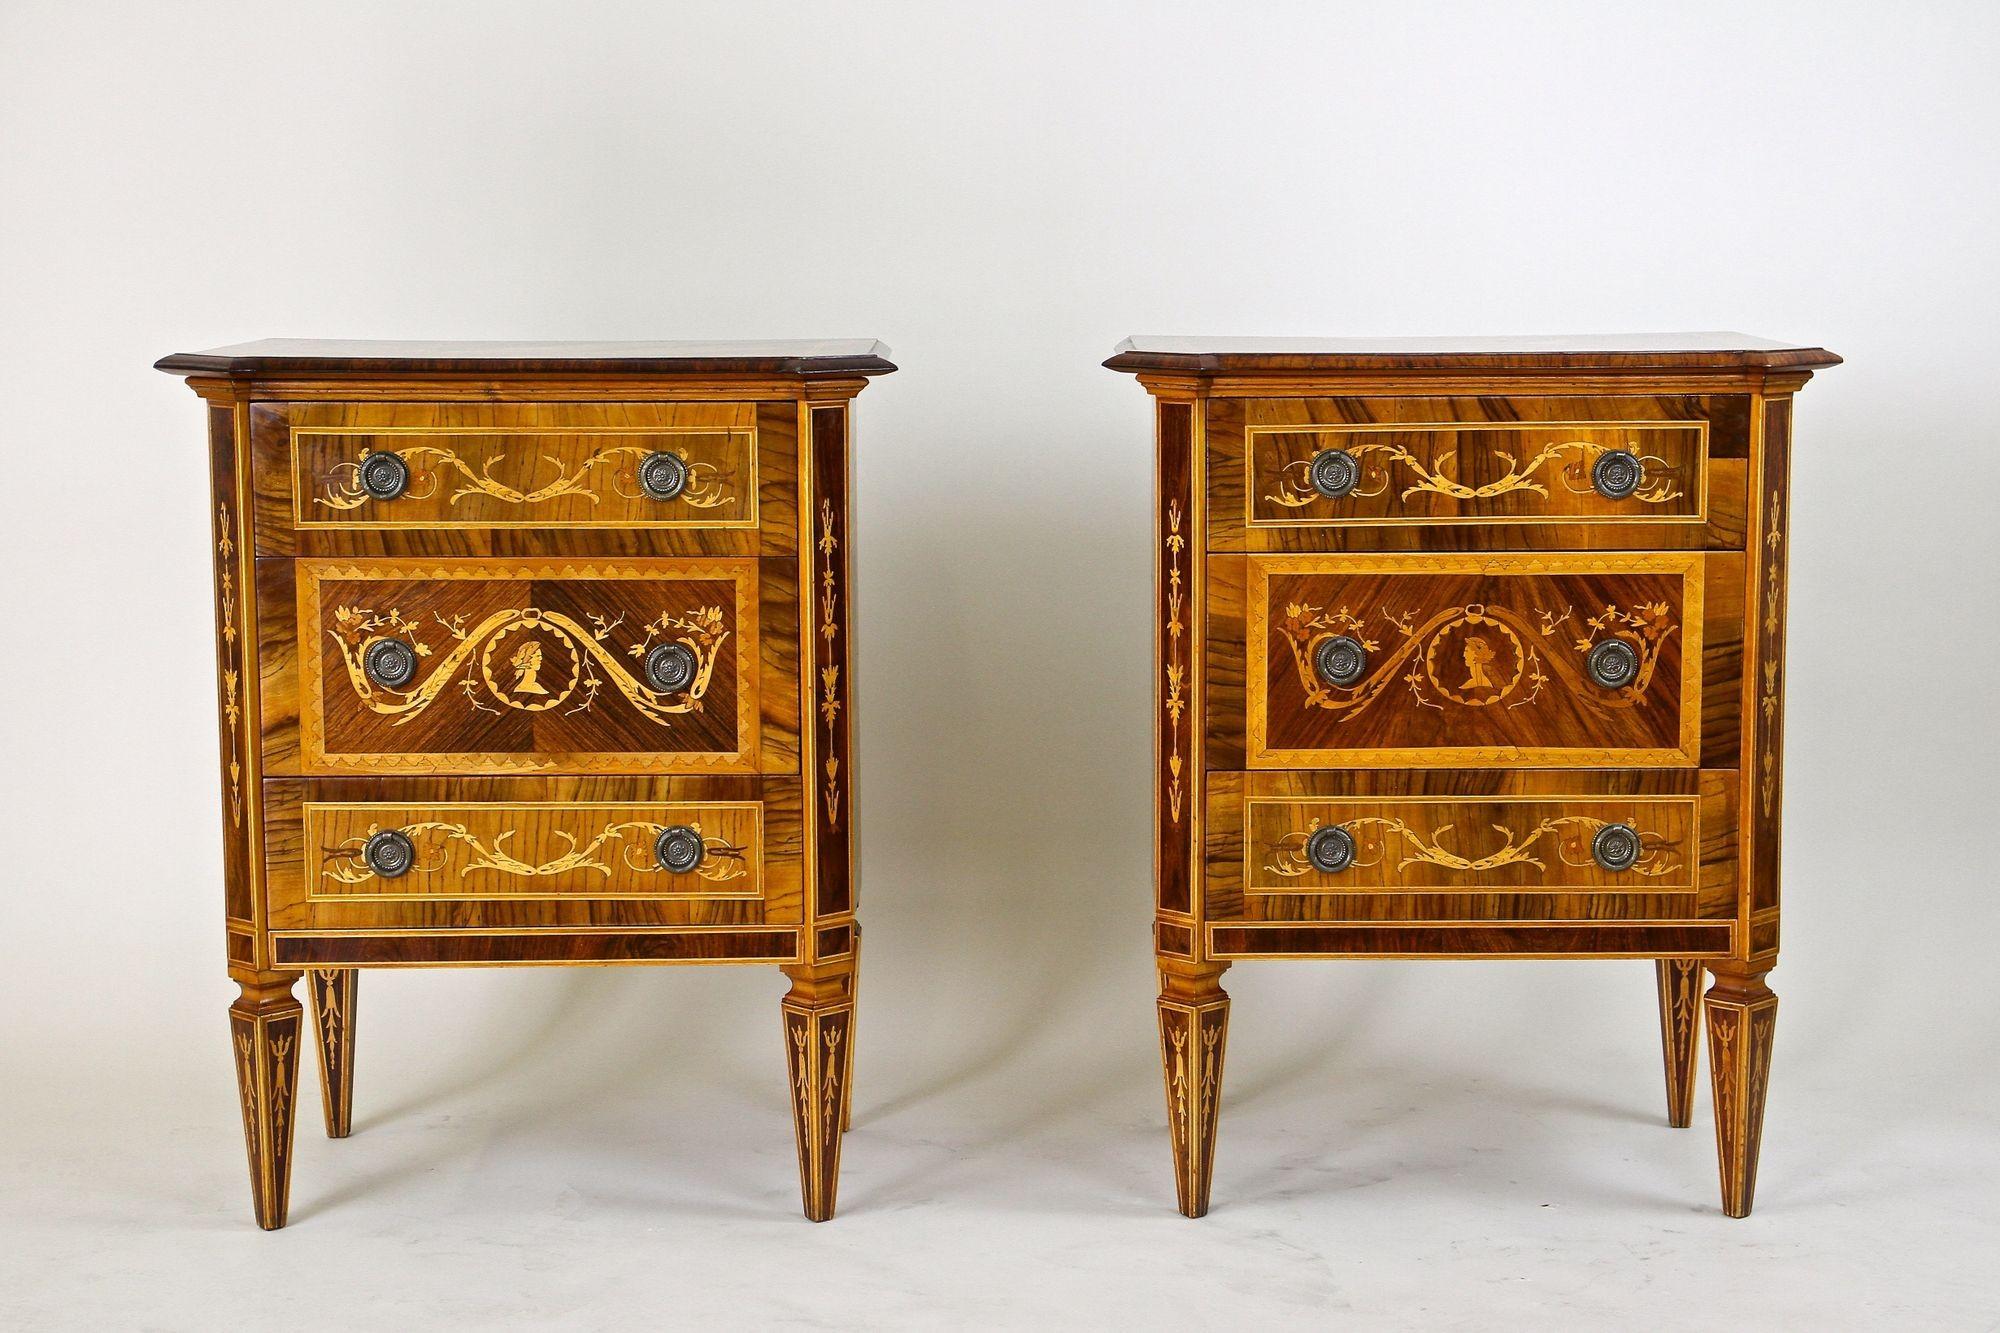 Extraordinary pair of petite Italian Marquetry pillar commodes/ side tables from the early 20th century around 1930. These artfully shaped commodes were elaborately handmade after the renowned model created by the famous Italian cabinet maker